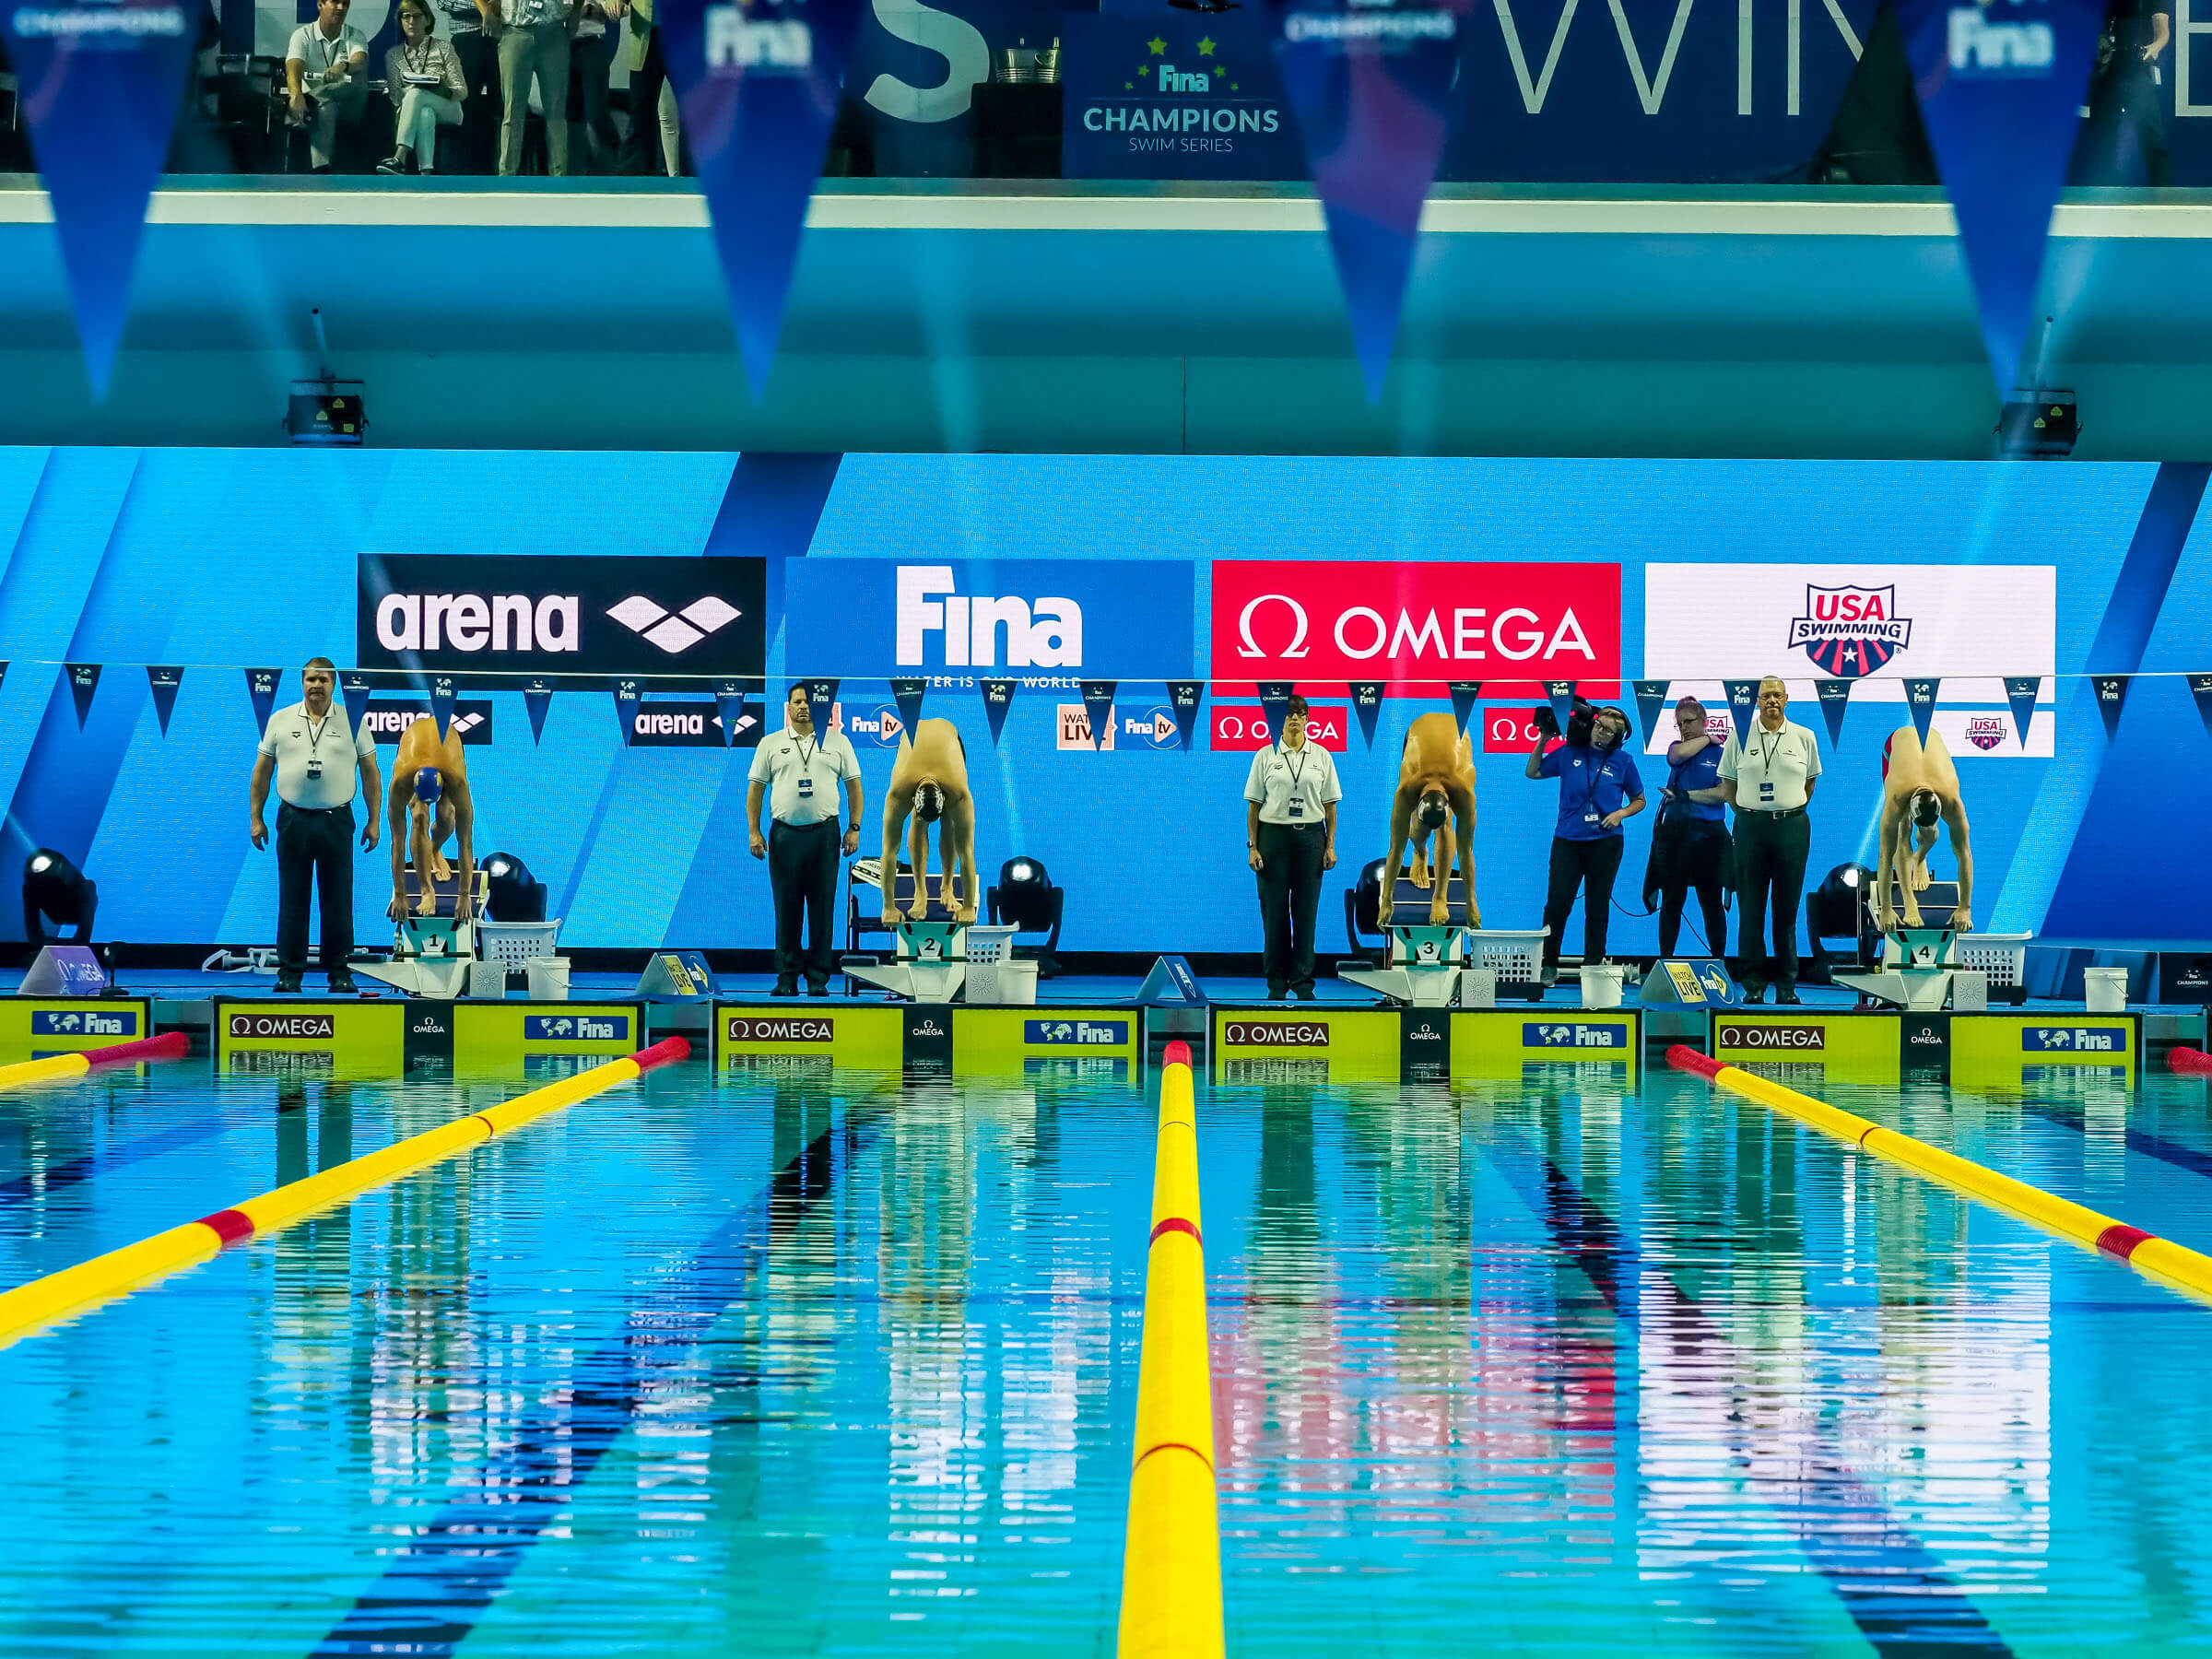 2019 FINA Champions Series Indianapolis Day 1 King Swims 221 200 Breast, Sjostrom Wins Two (PHOTOS)